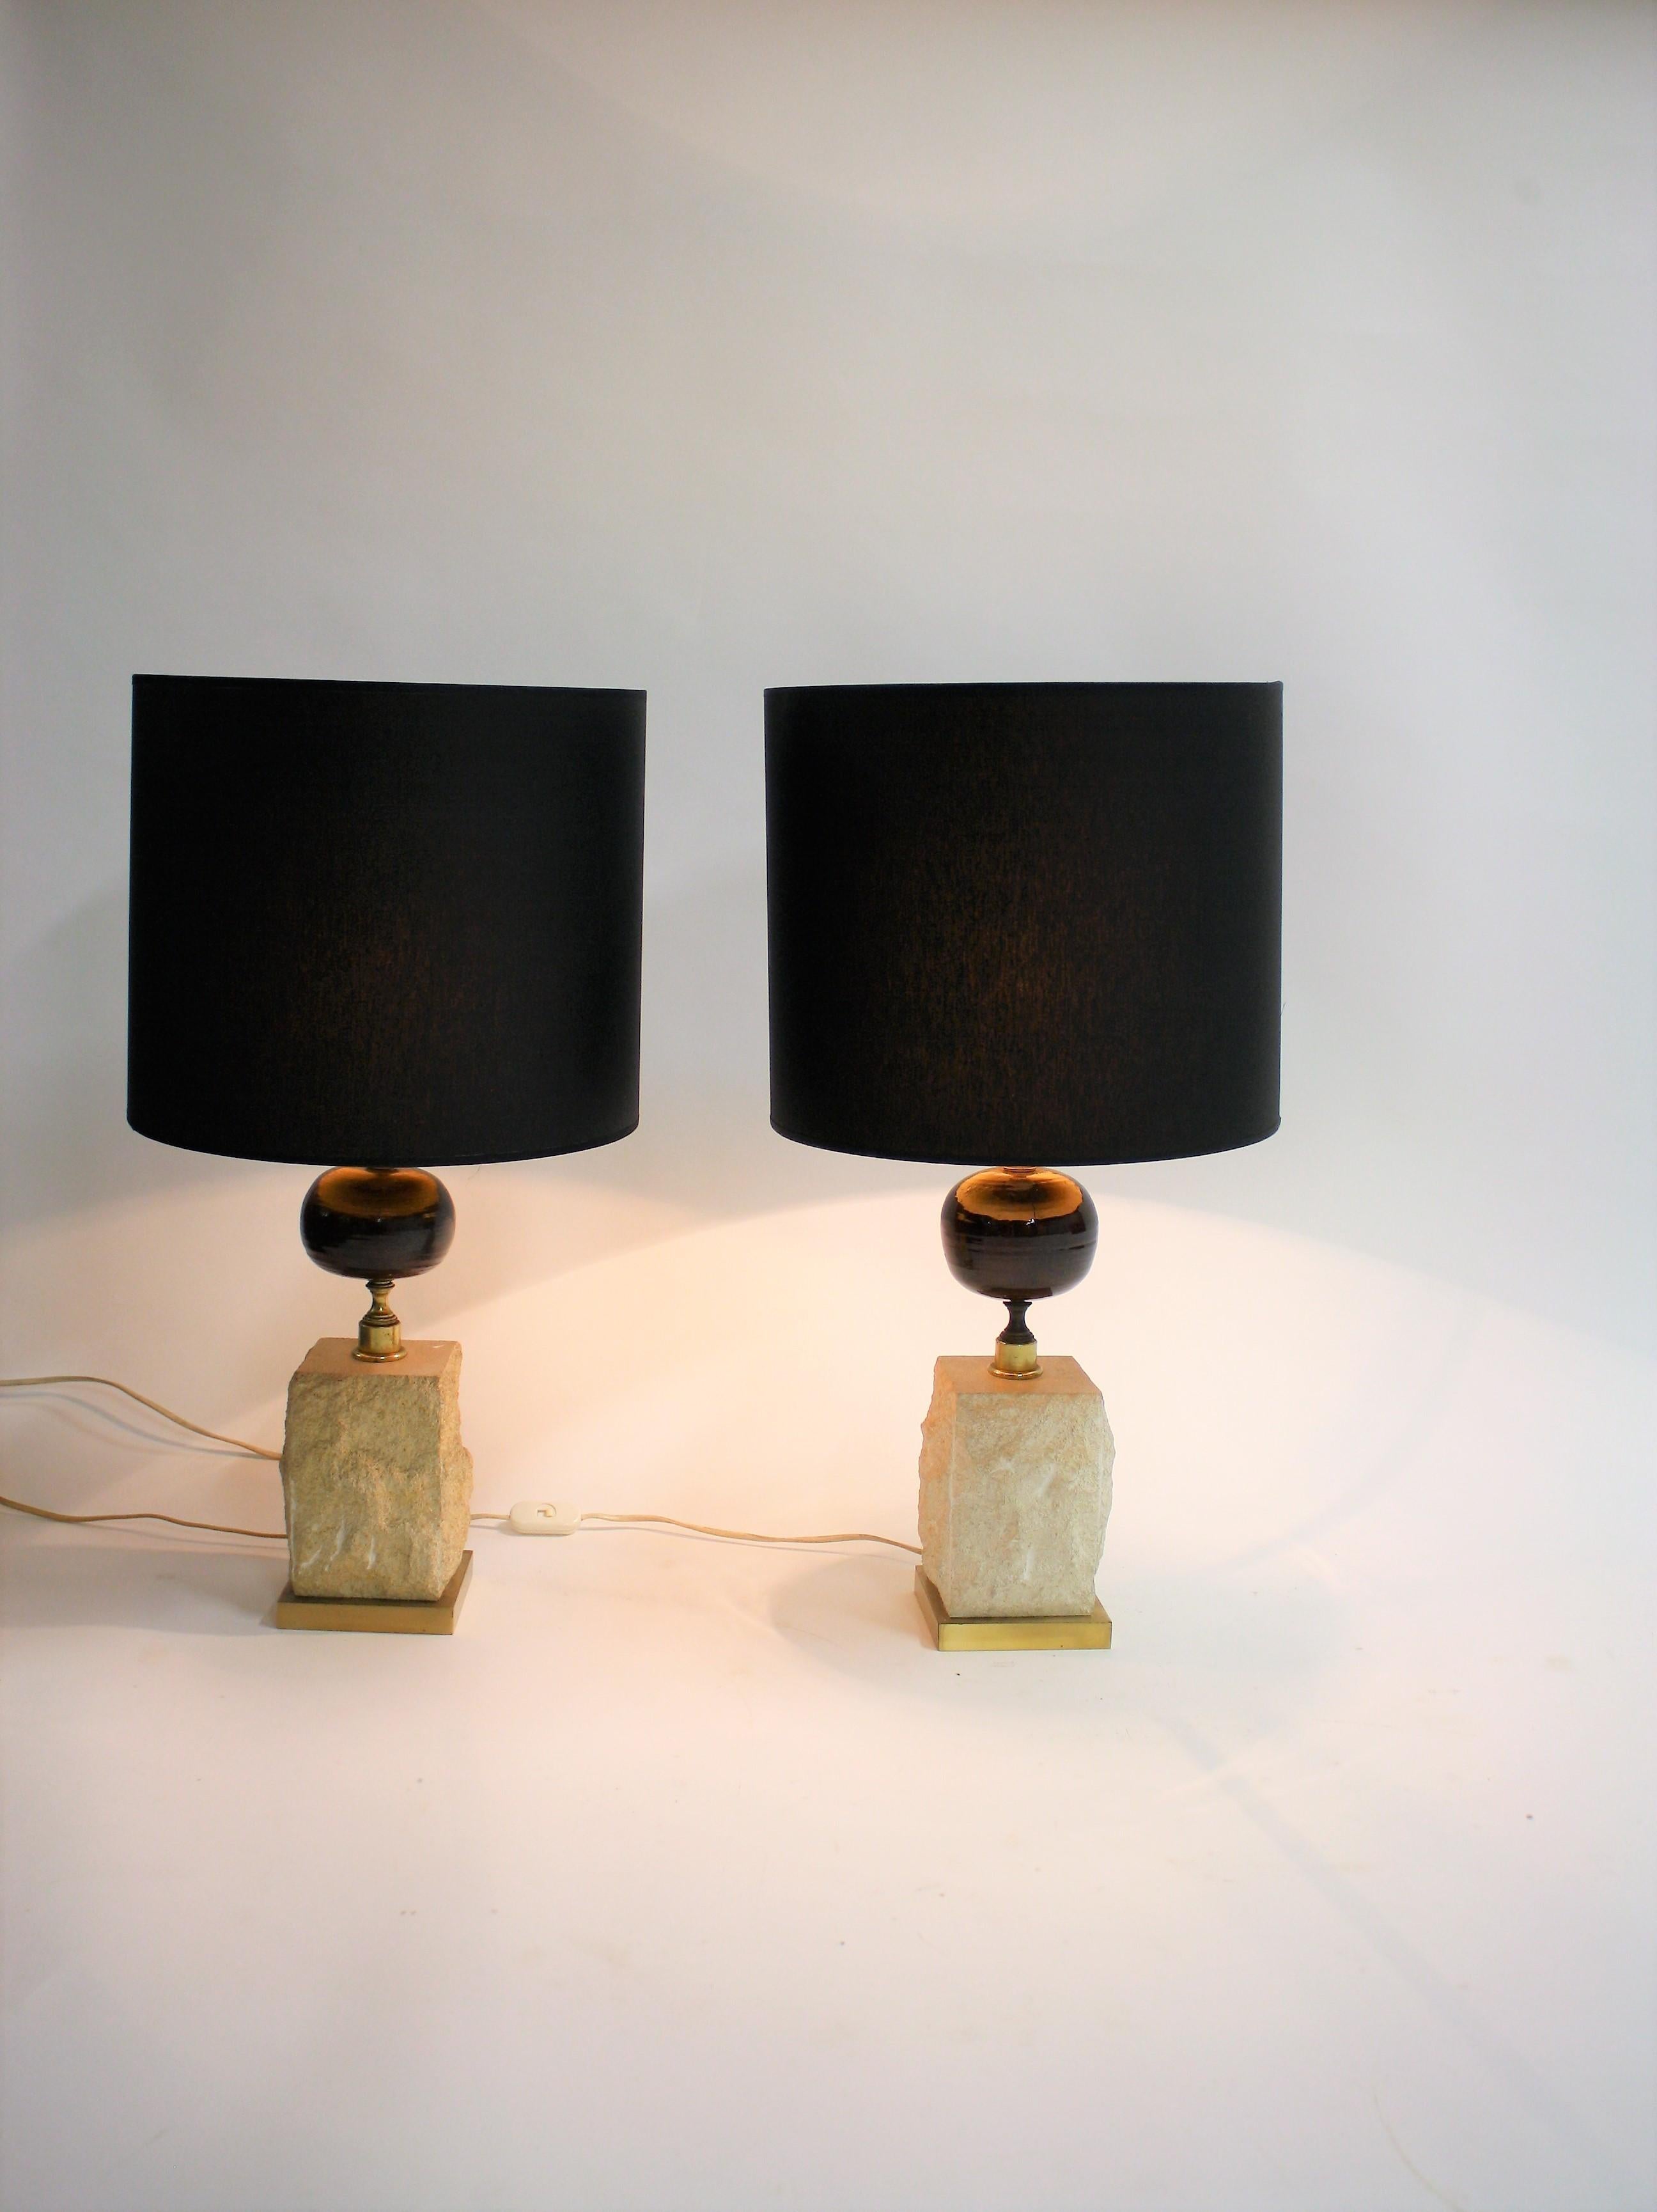 Vintage midcentury brass table lamps with a natural travertine stone base and a wooden centerpiece.

Thess handsome lamps come with custom made gold finish shades.

Maison Barbier style.

Very good condition,slight patinated brass.

Tested